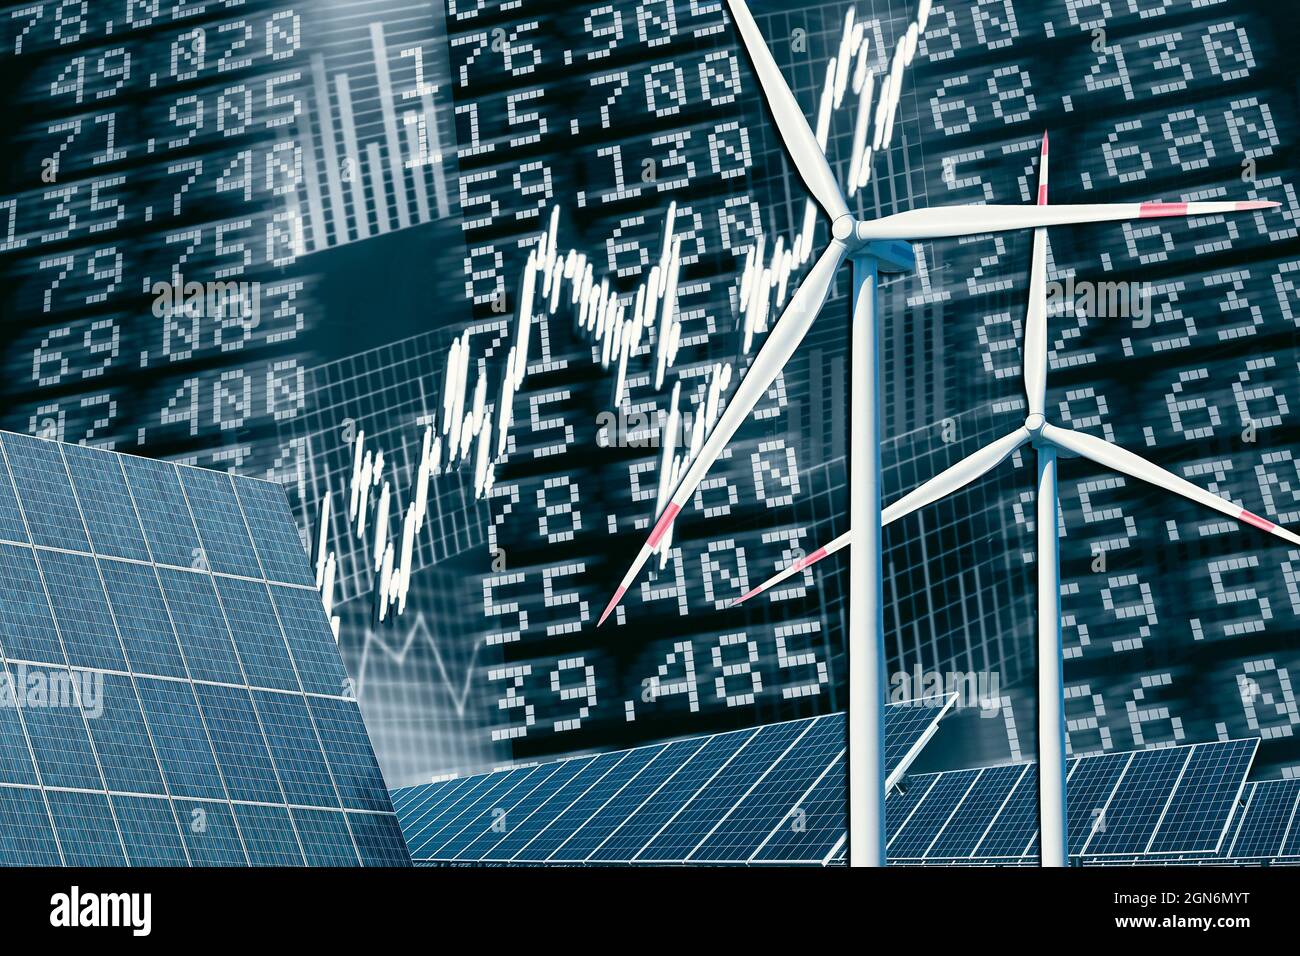 Wind turbines and solar panel with price board, stock prices and diagrams Stock Photo